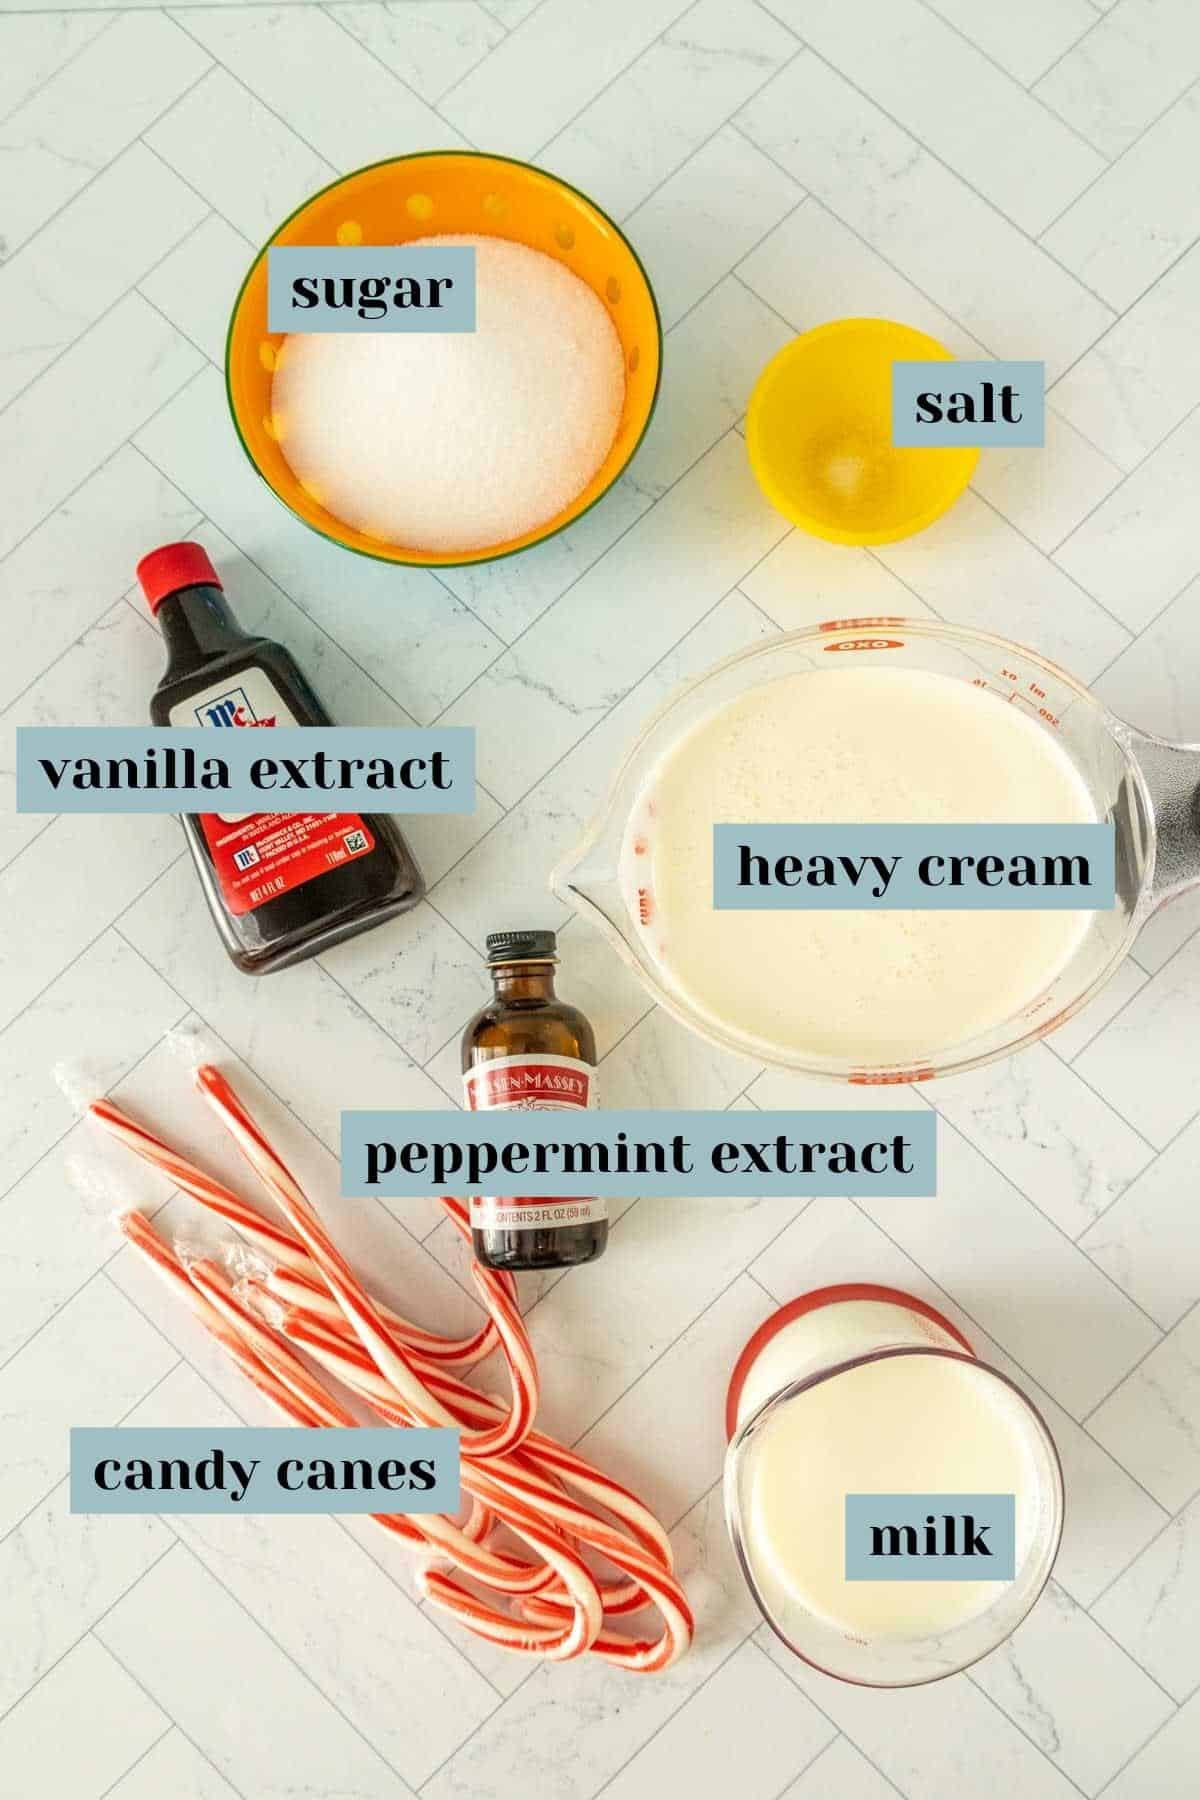 Ingredients for a candy cane ice cream.